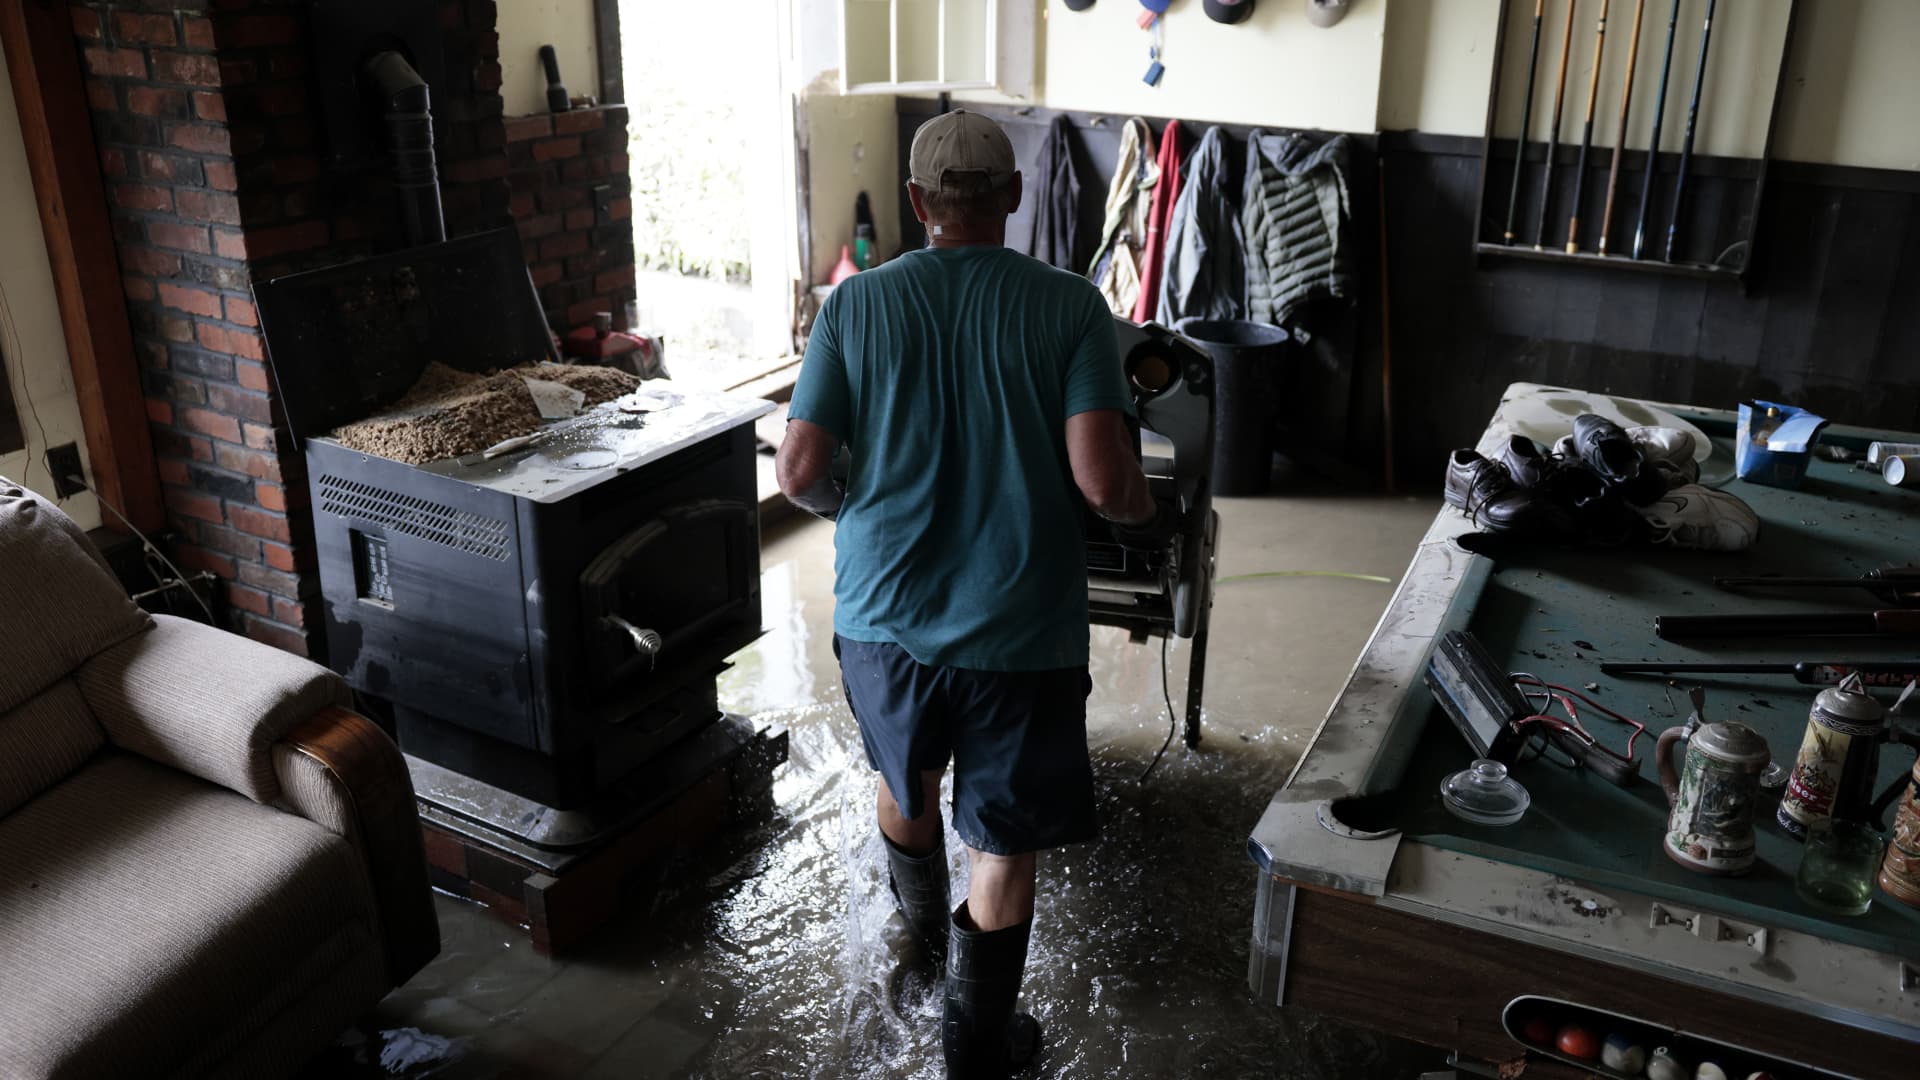 A flood insurance quirk makes basements a bad place to keep your stuff